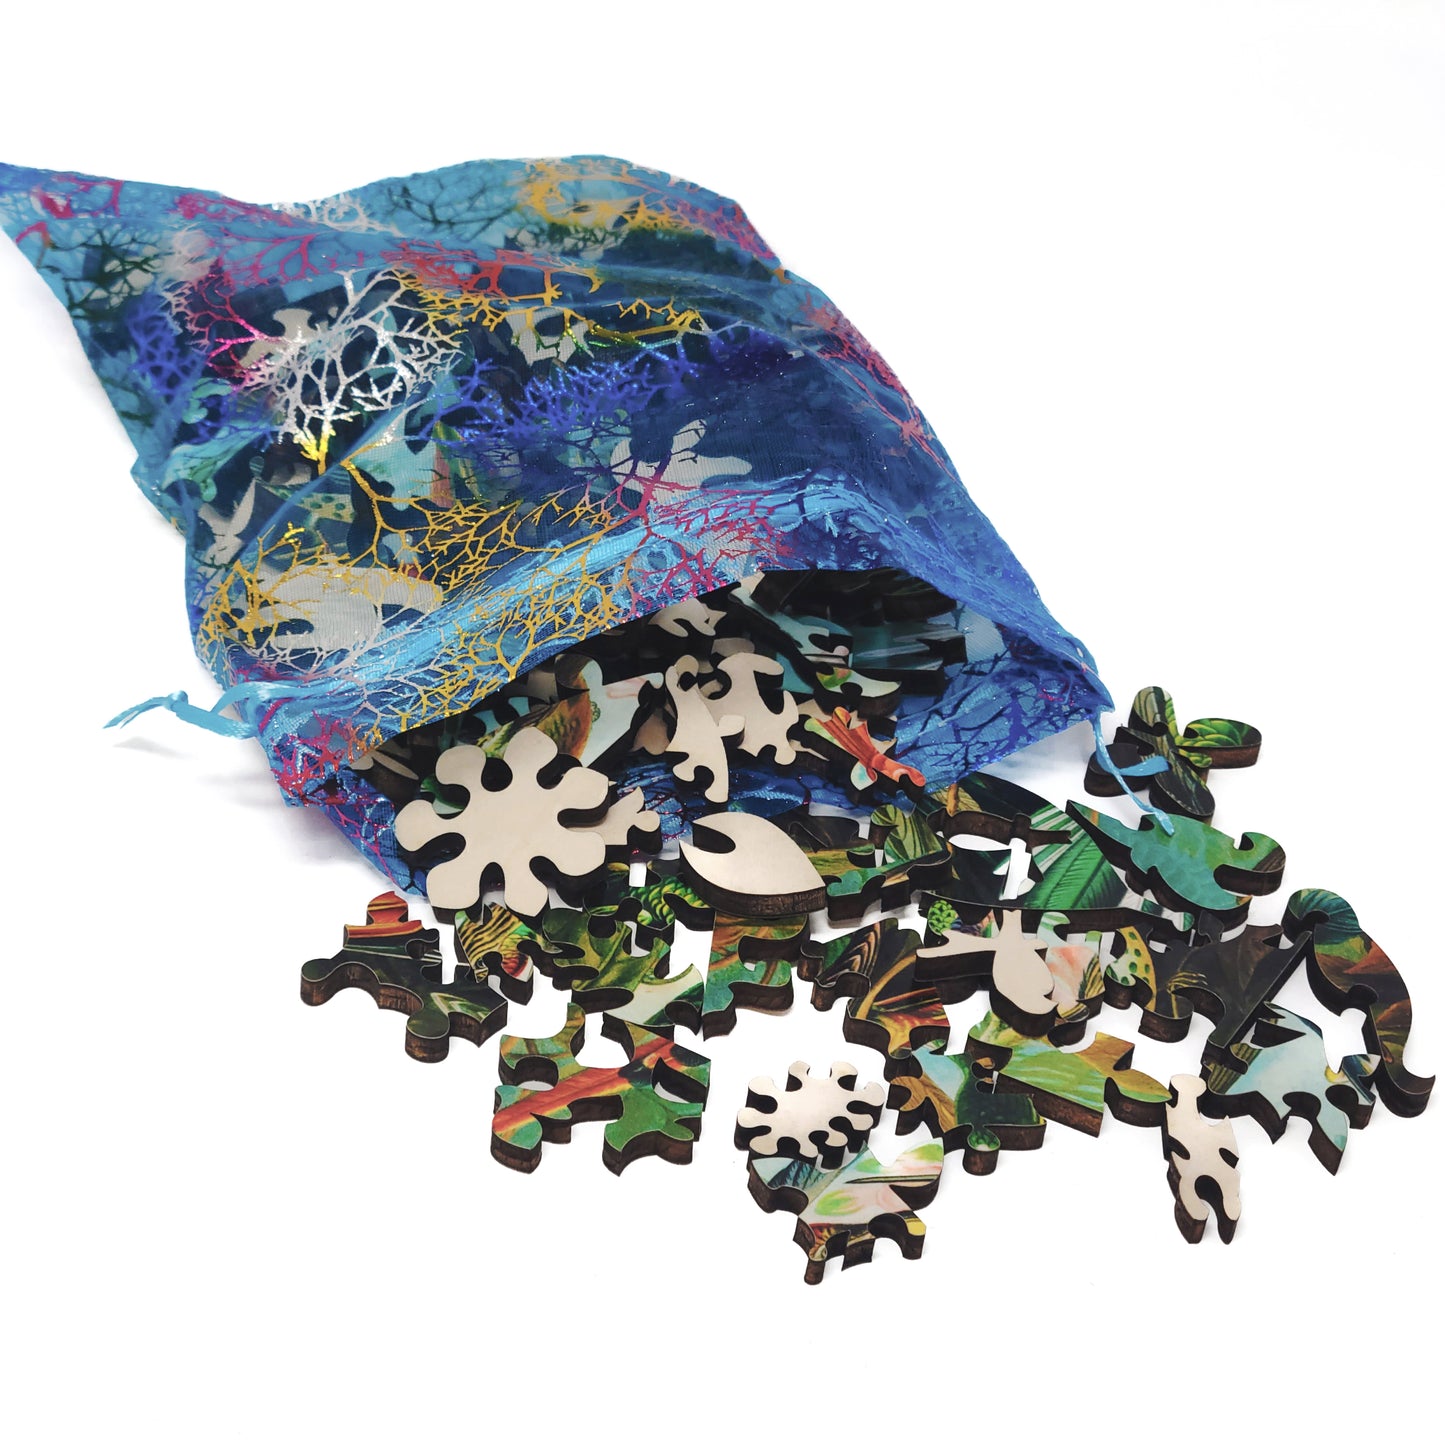 Wooden Jigsaw Puzzle with Uniquely Shaped Pieces for Adults - 145 Pieces - Hummingbirds